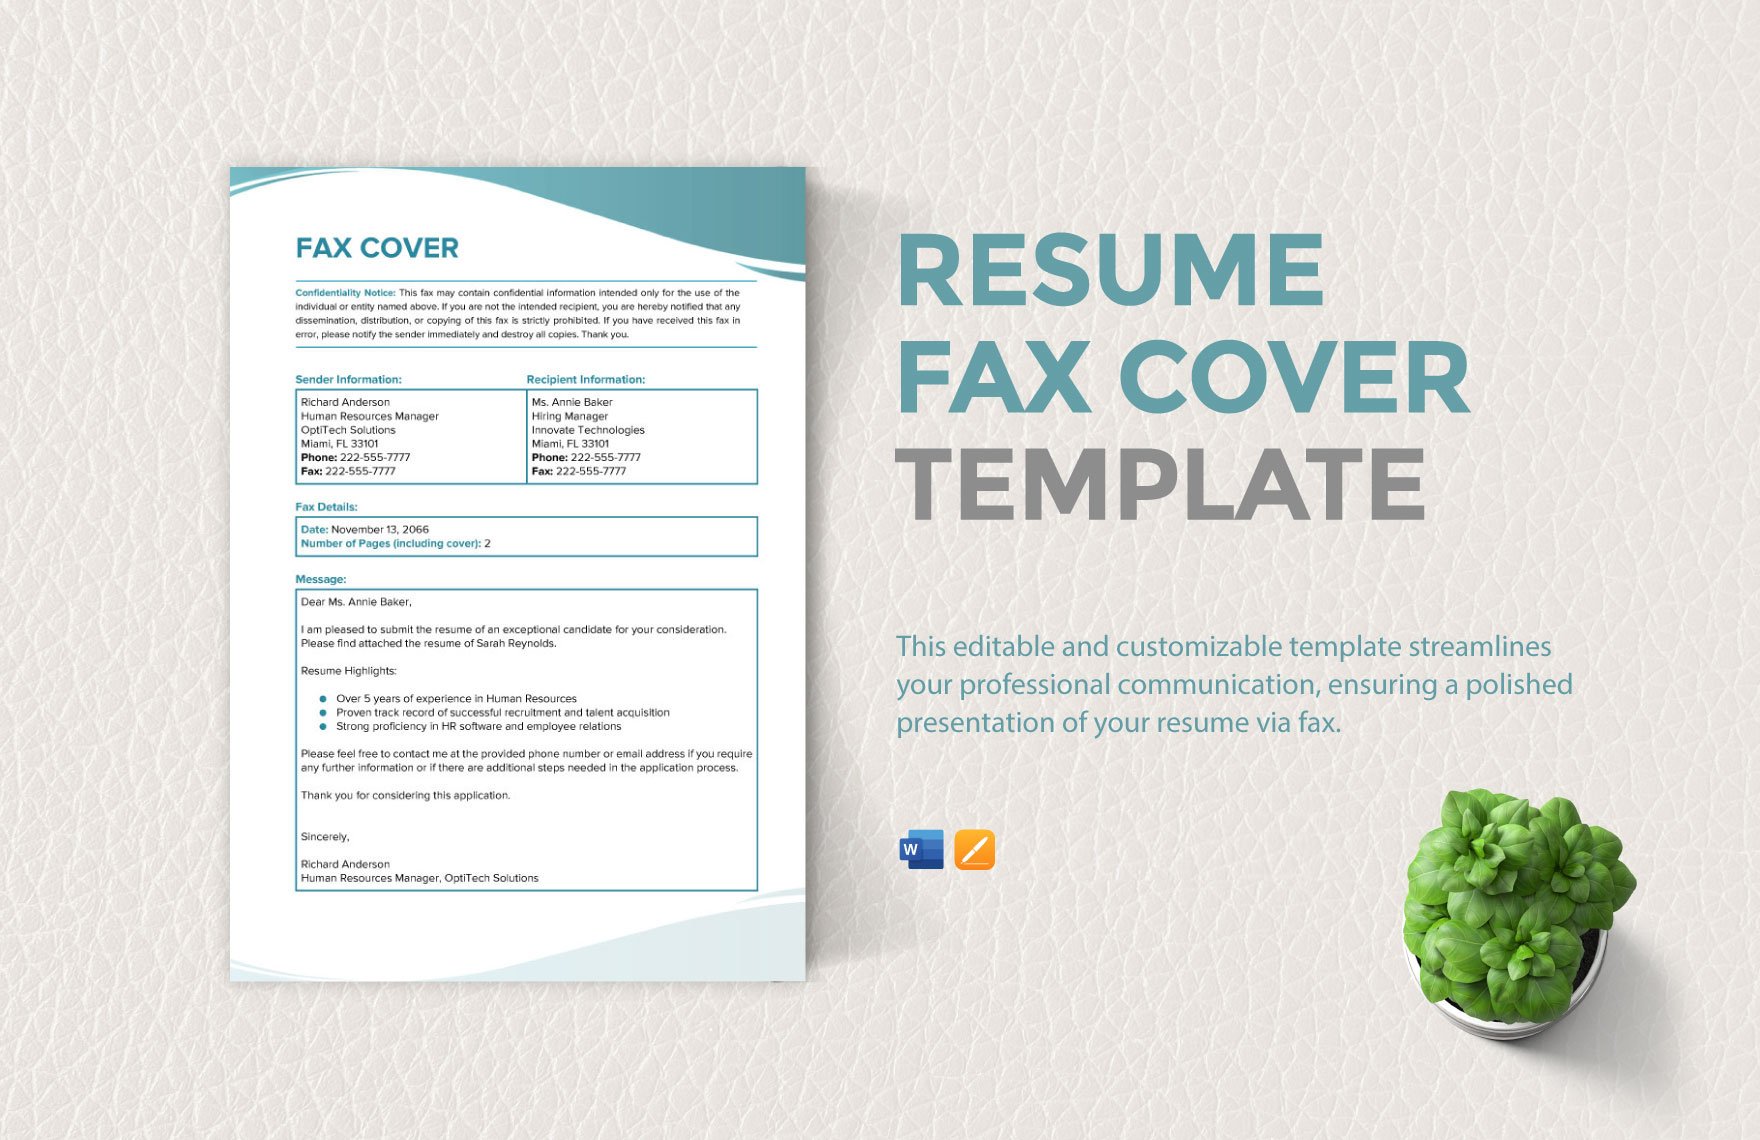 Resume Fax Cover Template in Word, Apple Pages